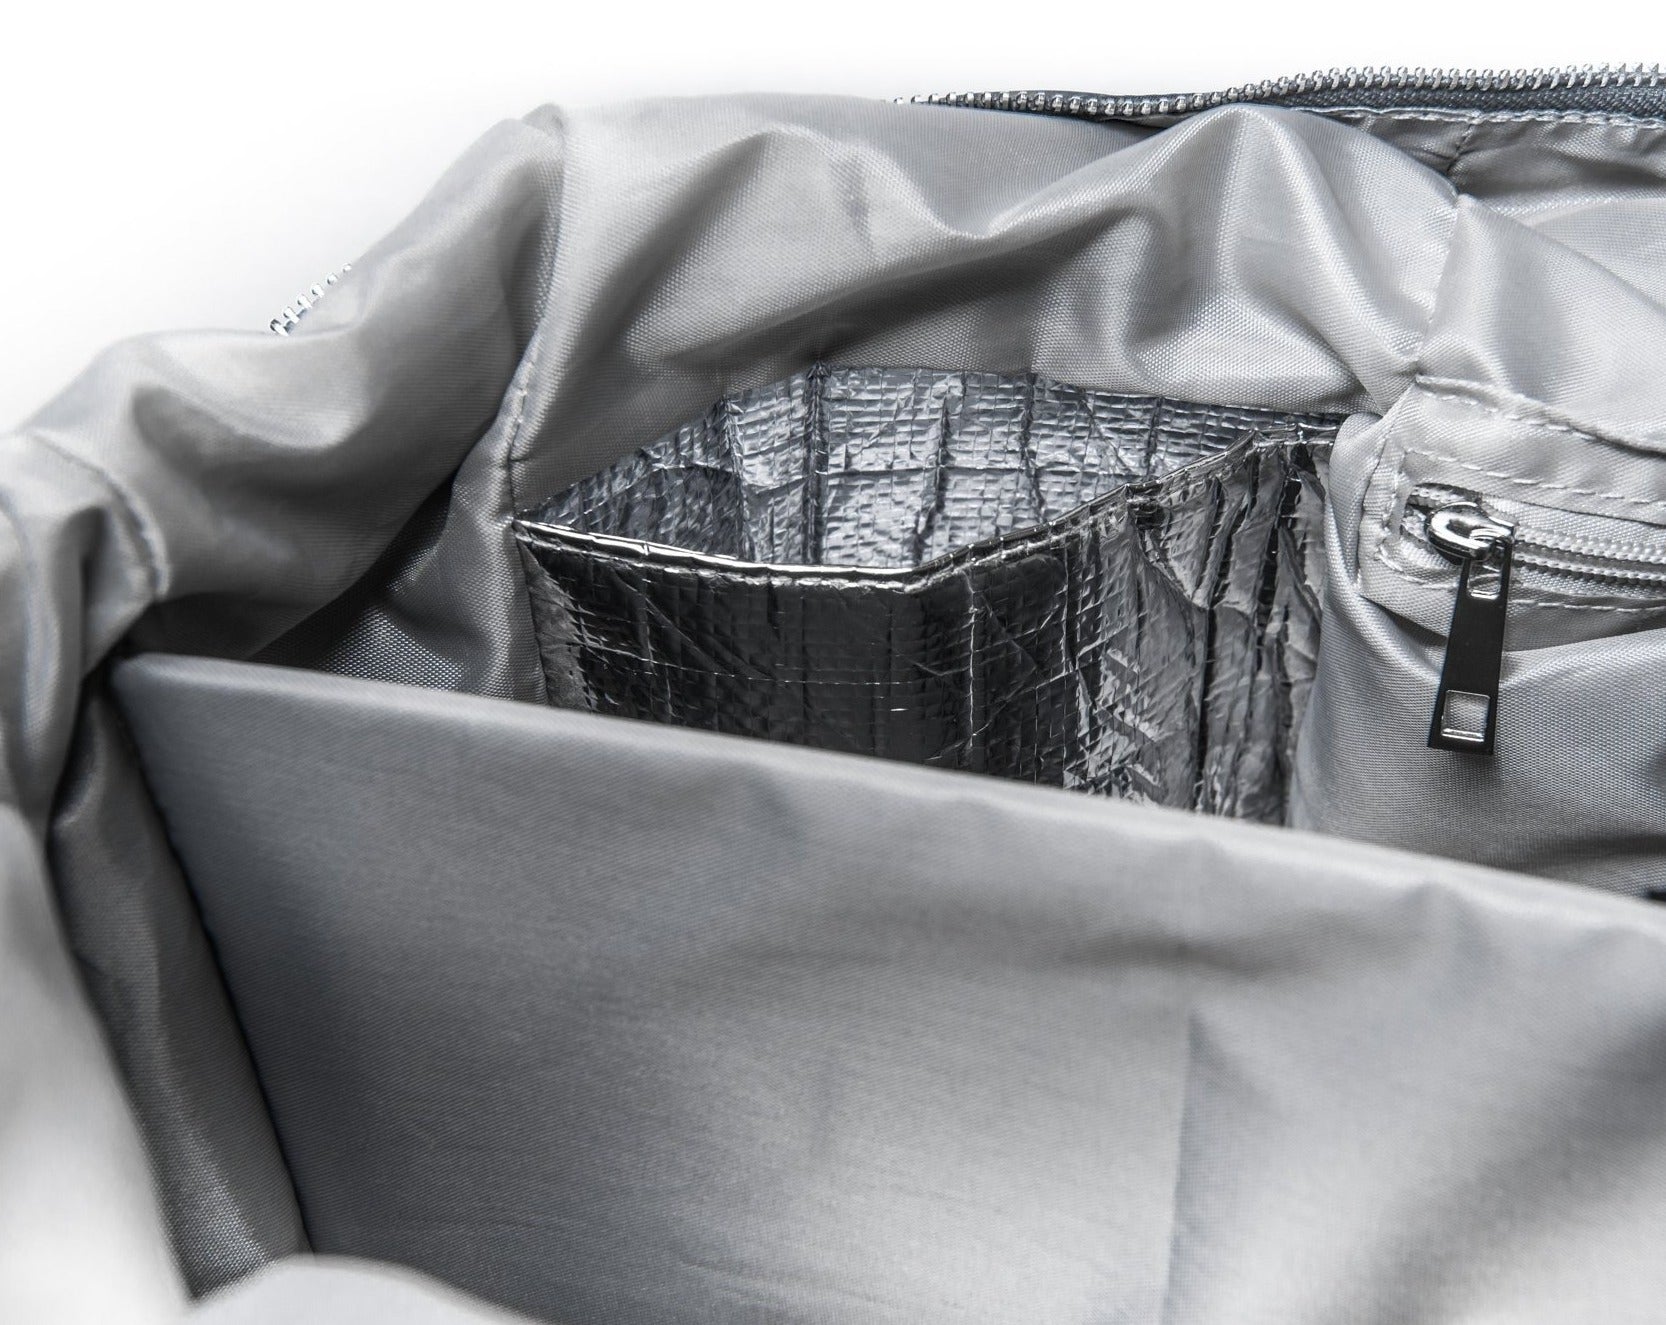 alt="inside The DUFFLE Nappy Bag insulated drink pocket, internal zipper pocket and the wall of the insulated snack compartment"